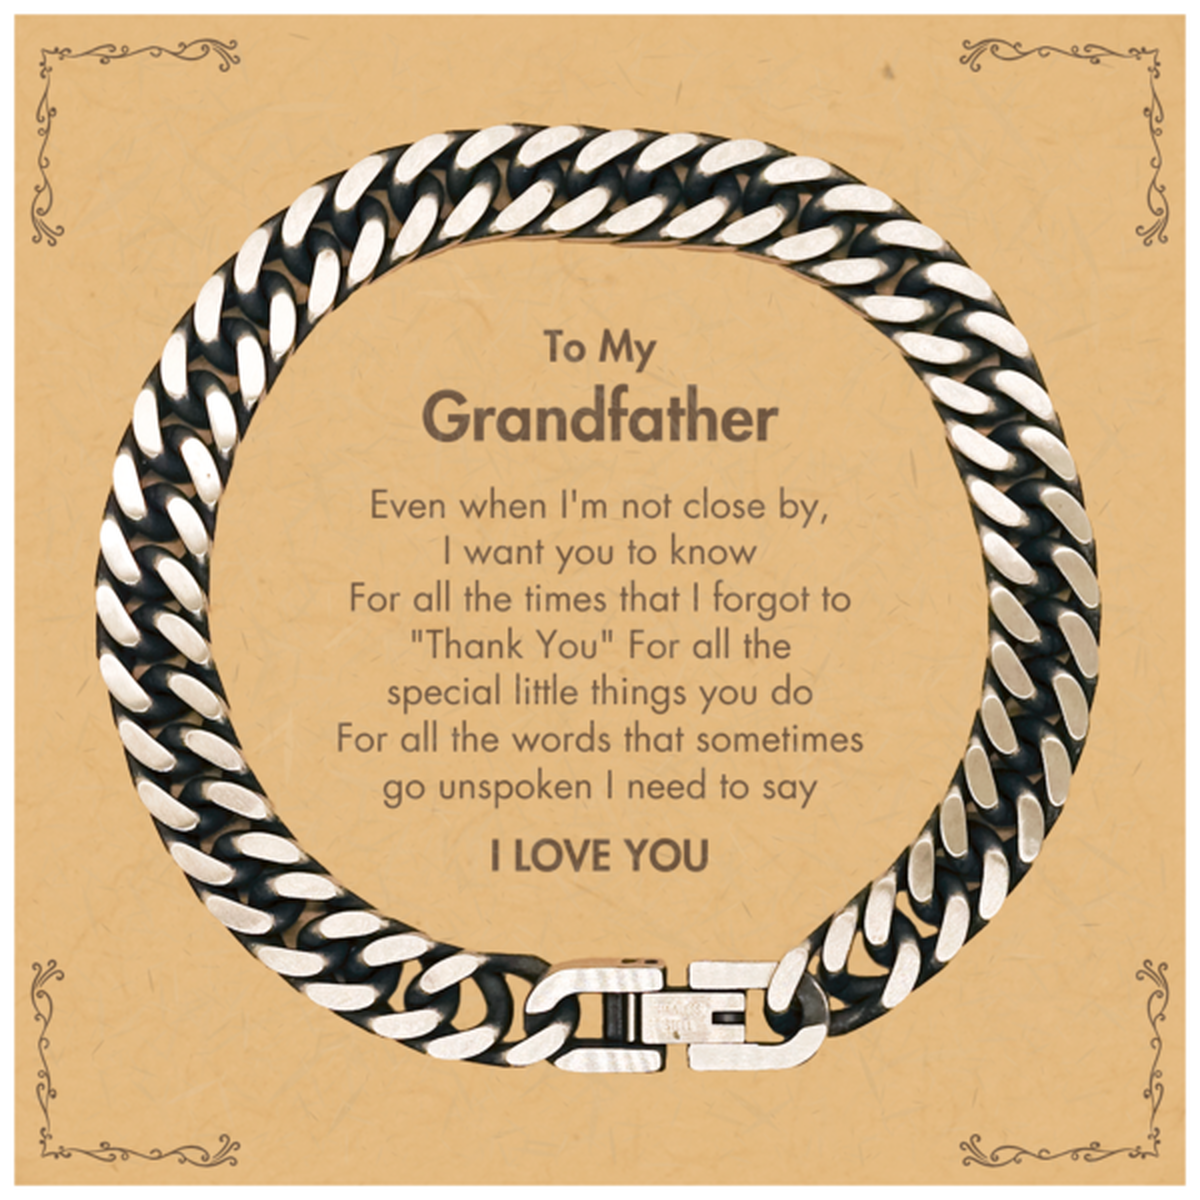 Thank You Gifts for Grandfather, Keepsake Cuban Link Chain Bracelet Gifts for Grandfather Birthday Mother's day Father's Day Grandfather For all the words That sometimes go unspoken I need to say I LOVE YOU